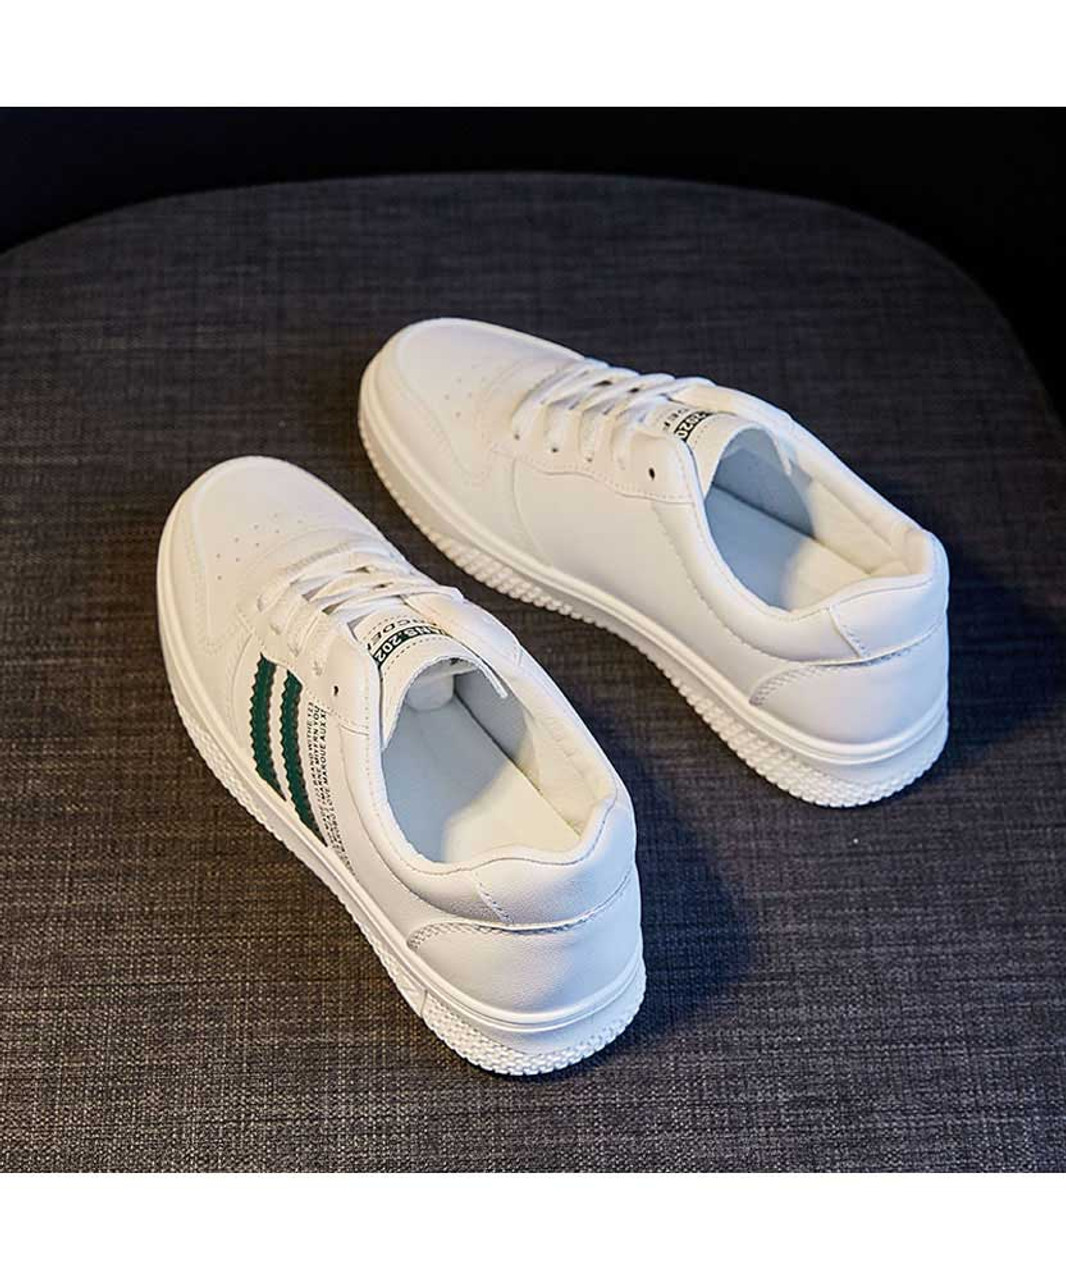 adidas Originals Superstar sneakers in white with collegiate green stripes  | ASOS